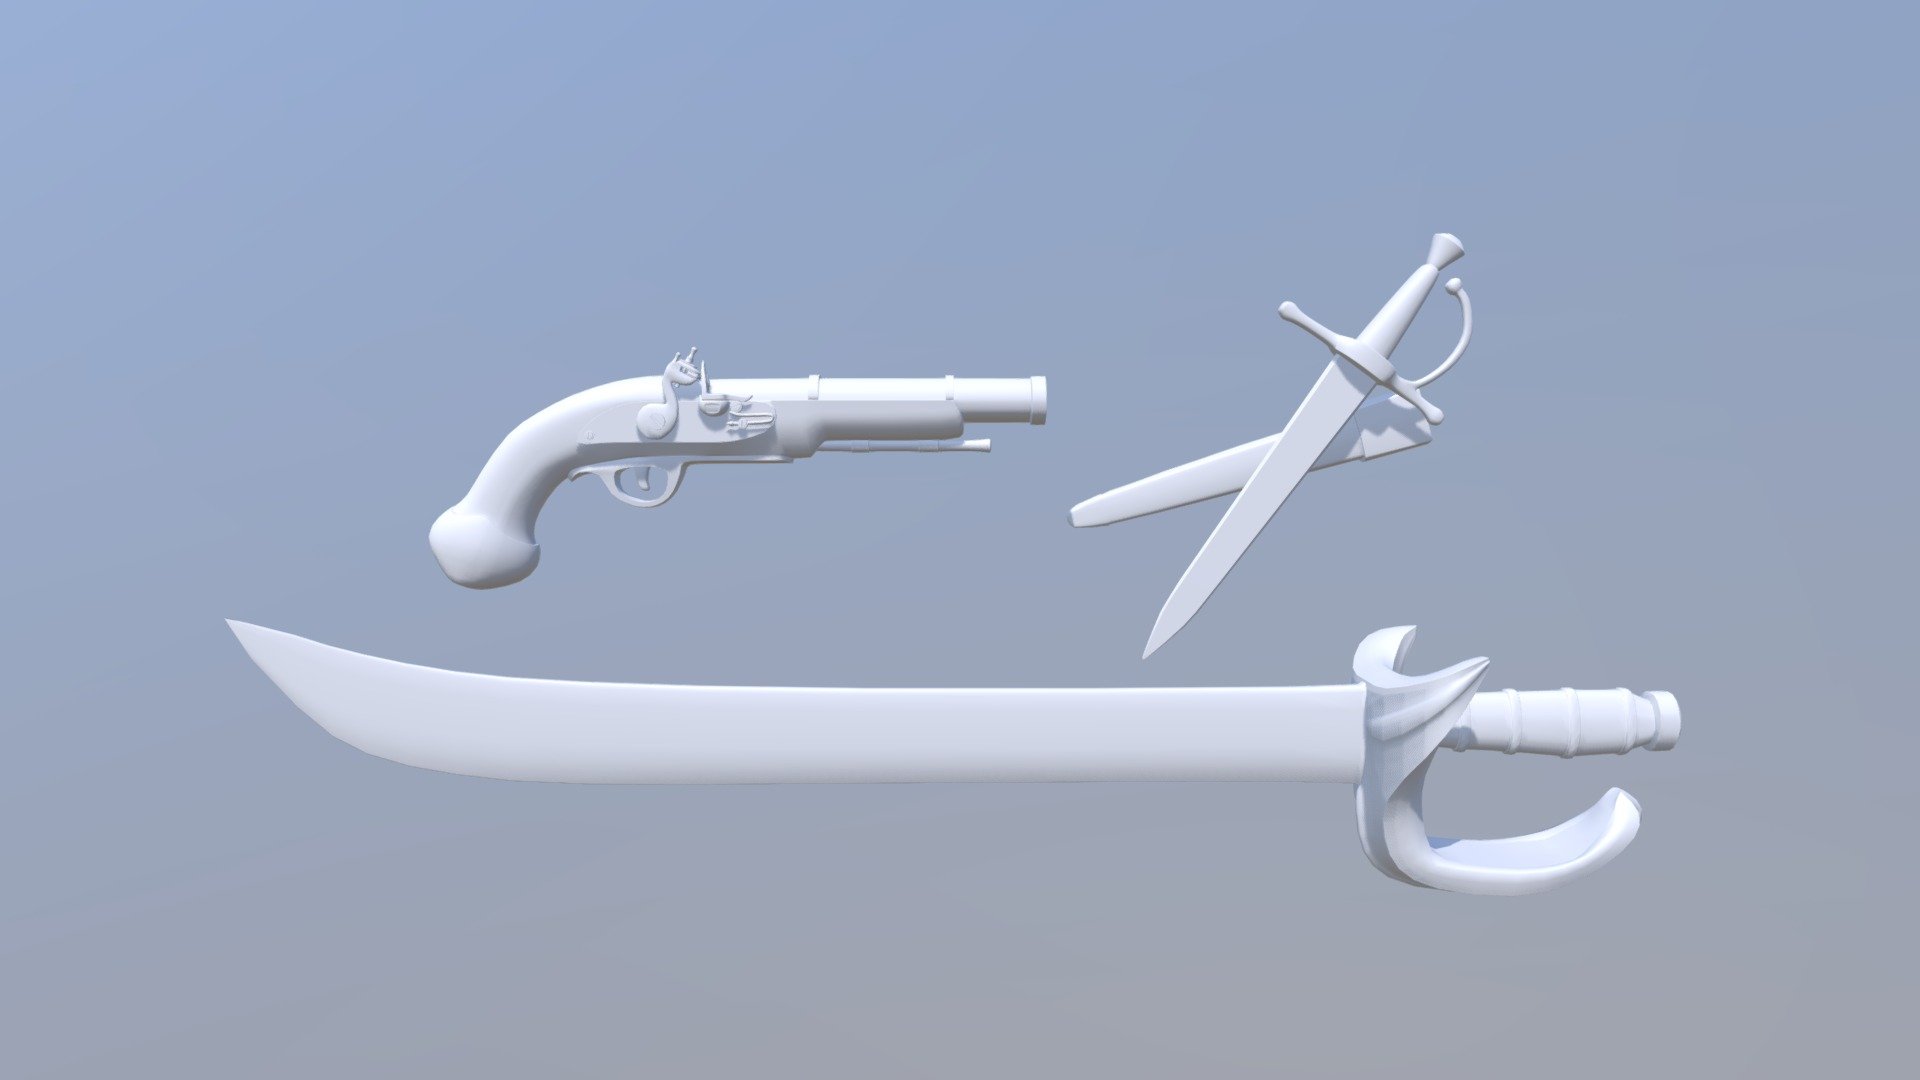 Pirate weapons